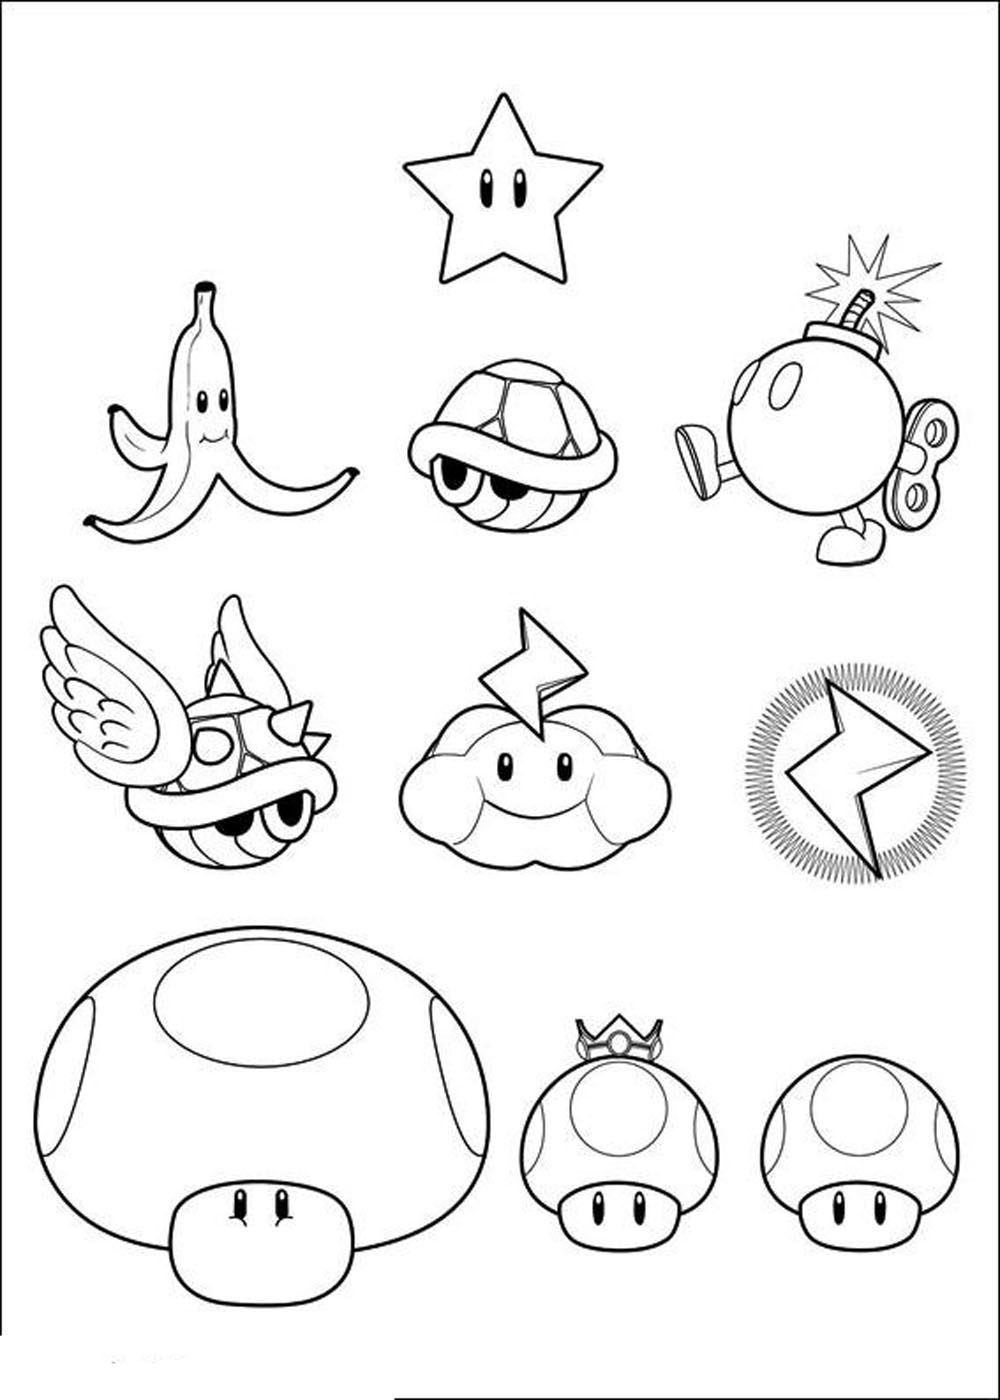 Super Mario Characters Coloring Pages at GetColorings.com | Free